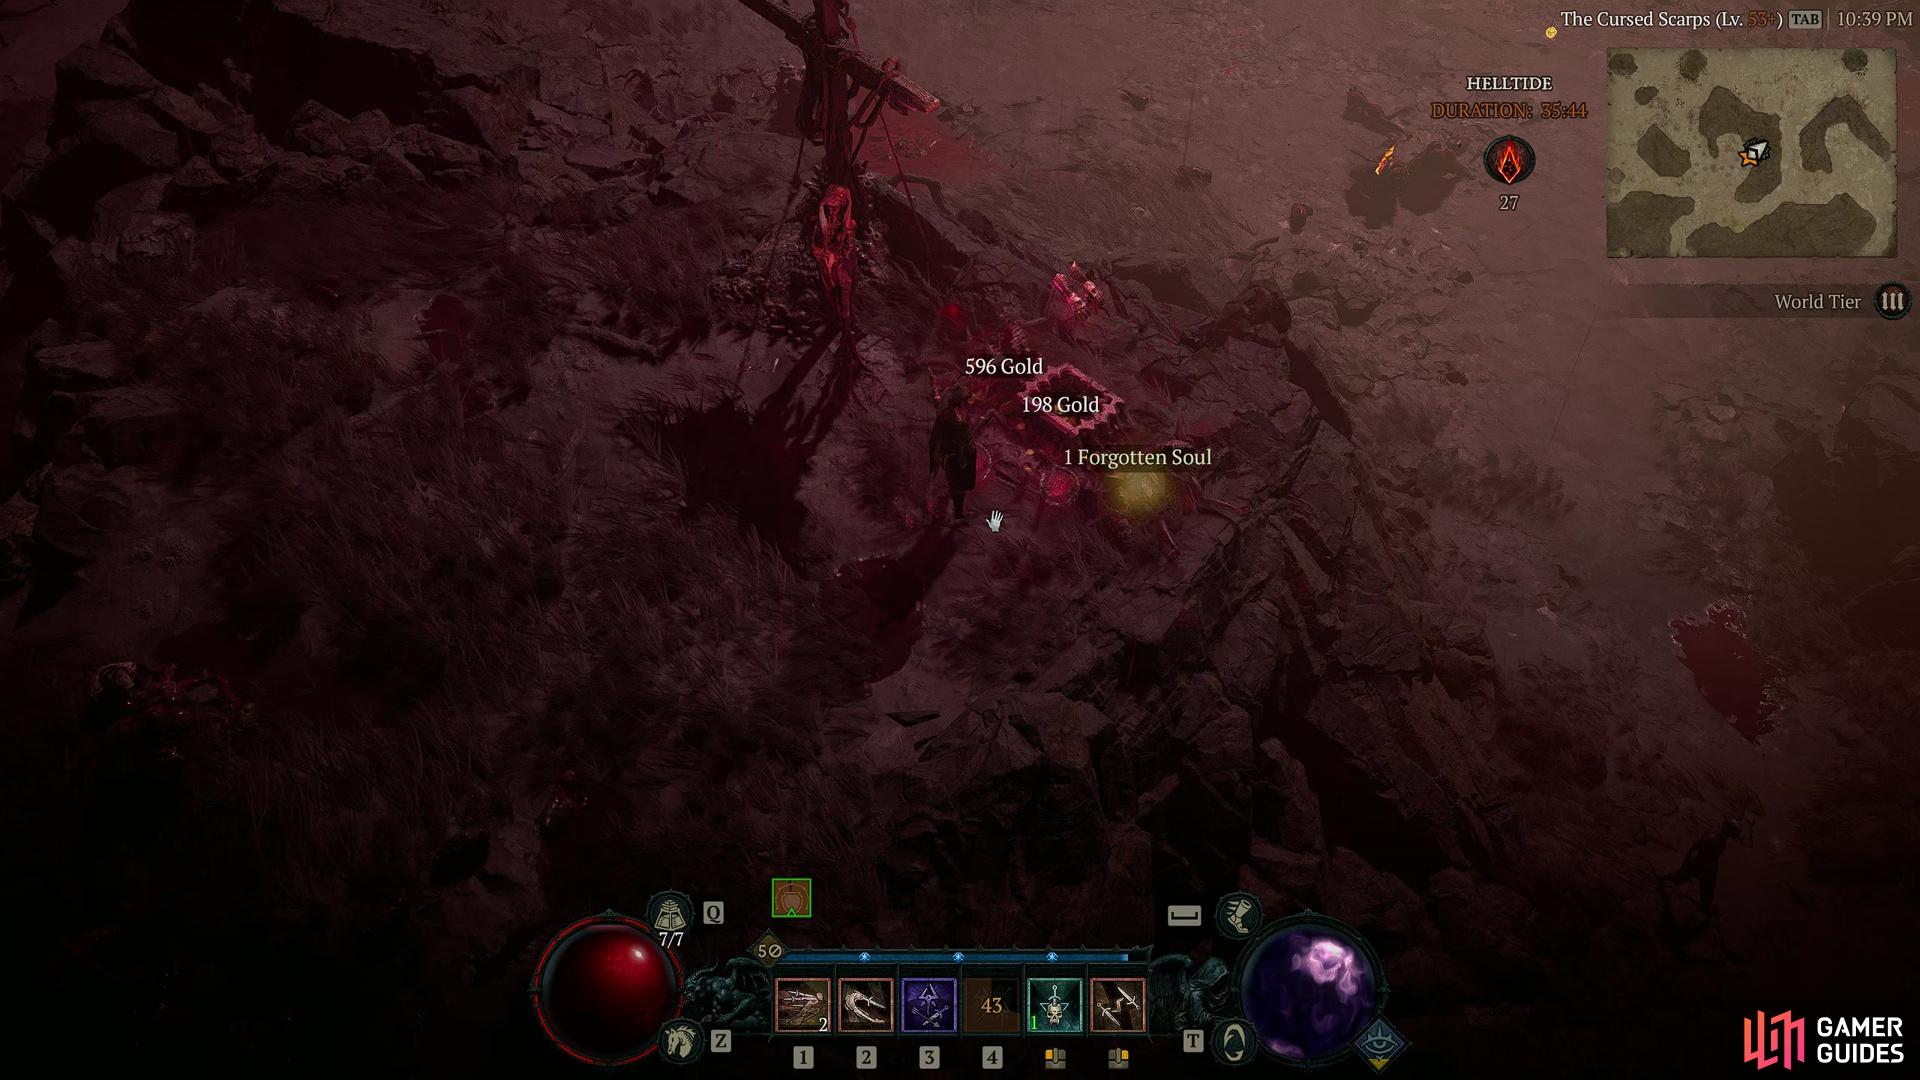 Here is how to get and farm Forgotten Souls in Diablo 4.